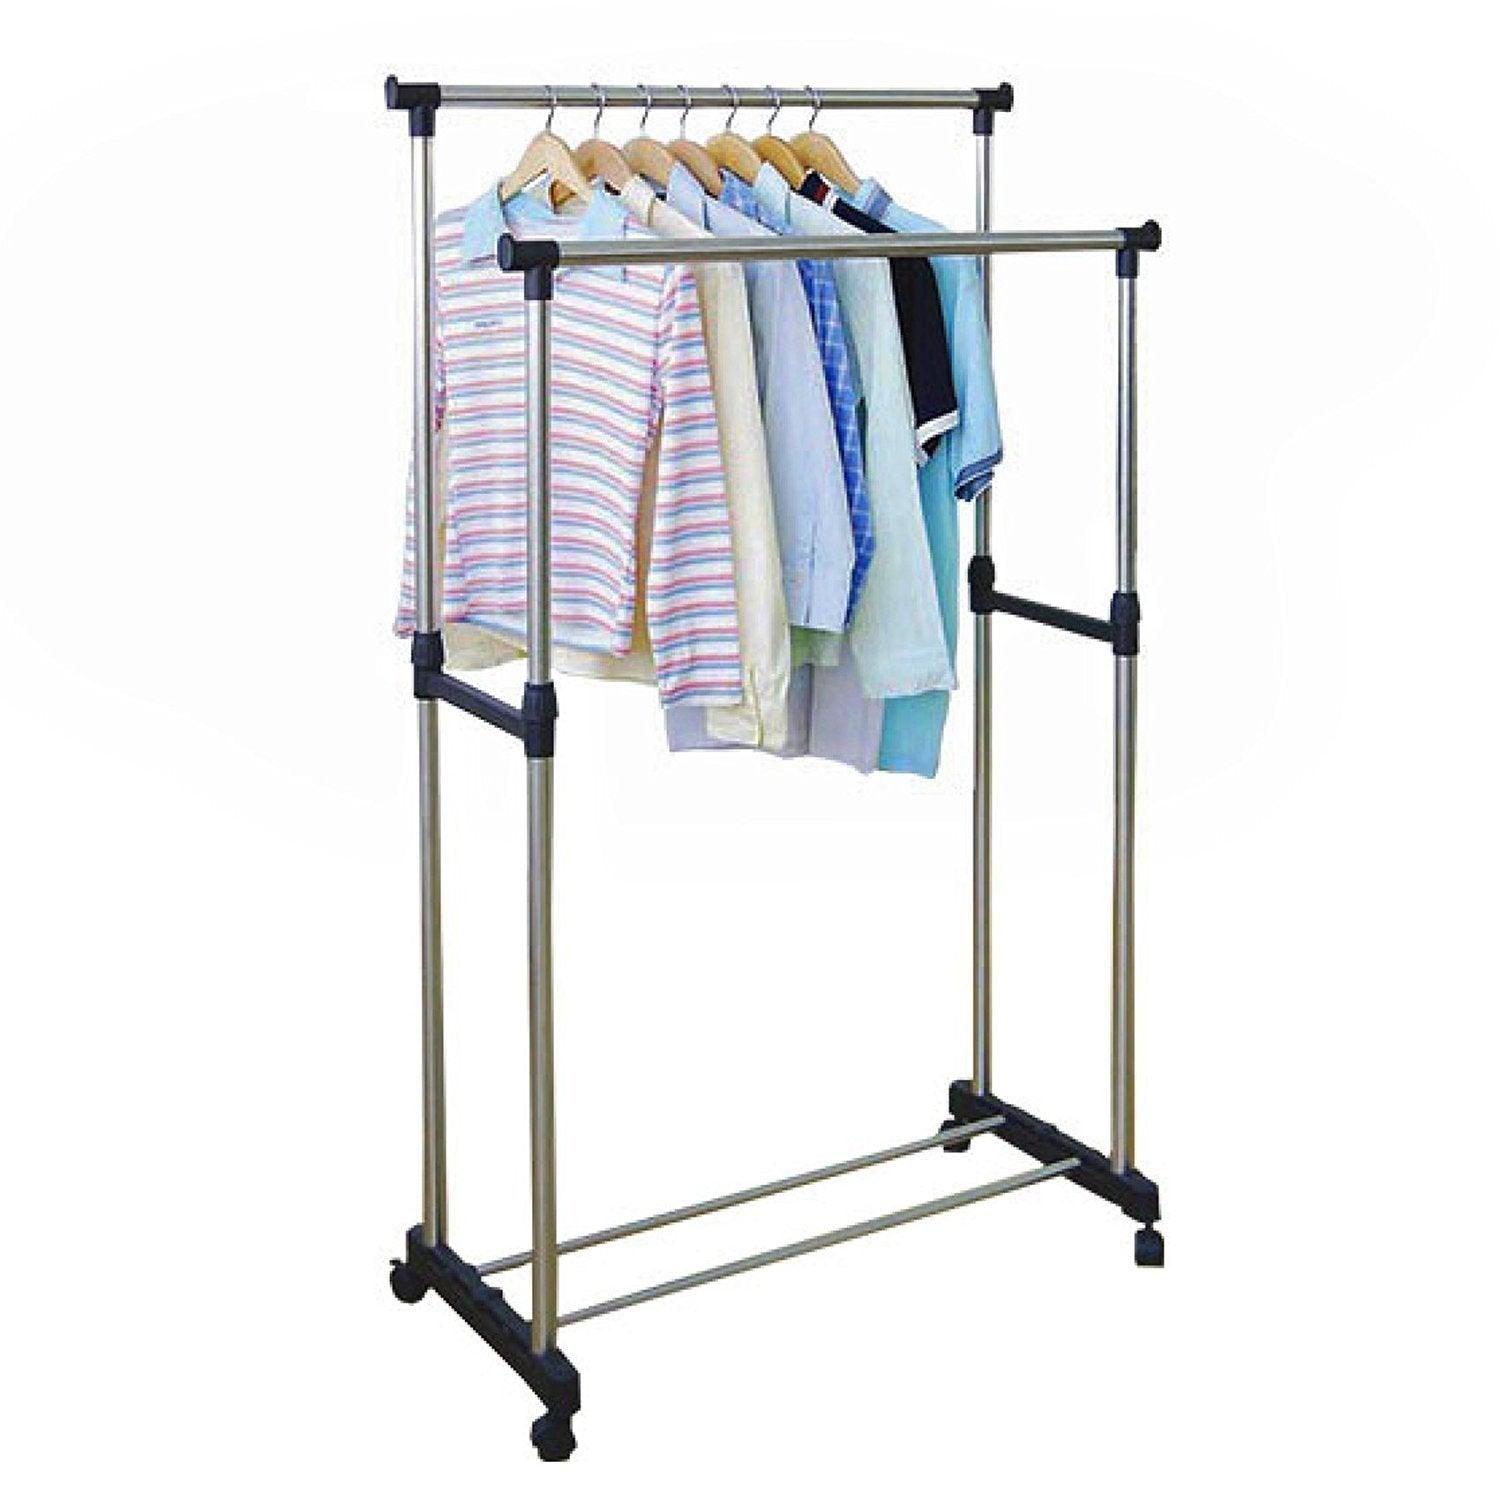 Double Pole Clothes-Rack - Karout Online -Karout Online Shopping In lebanon - Karout Express Delivery 